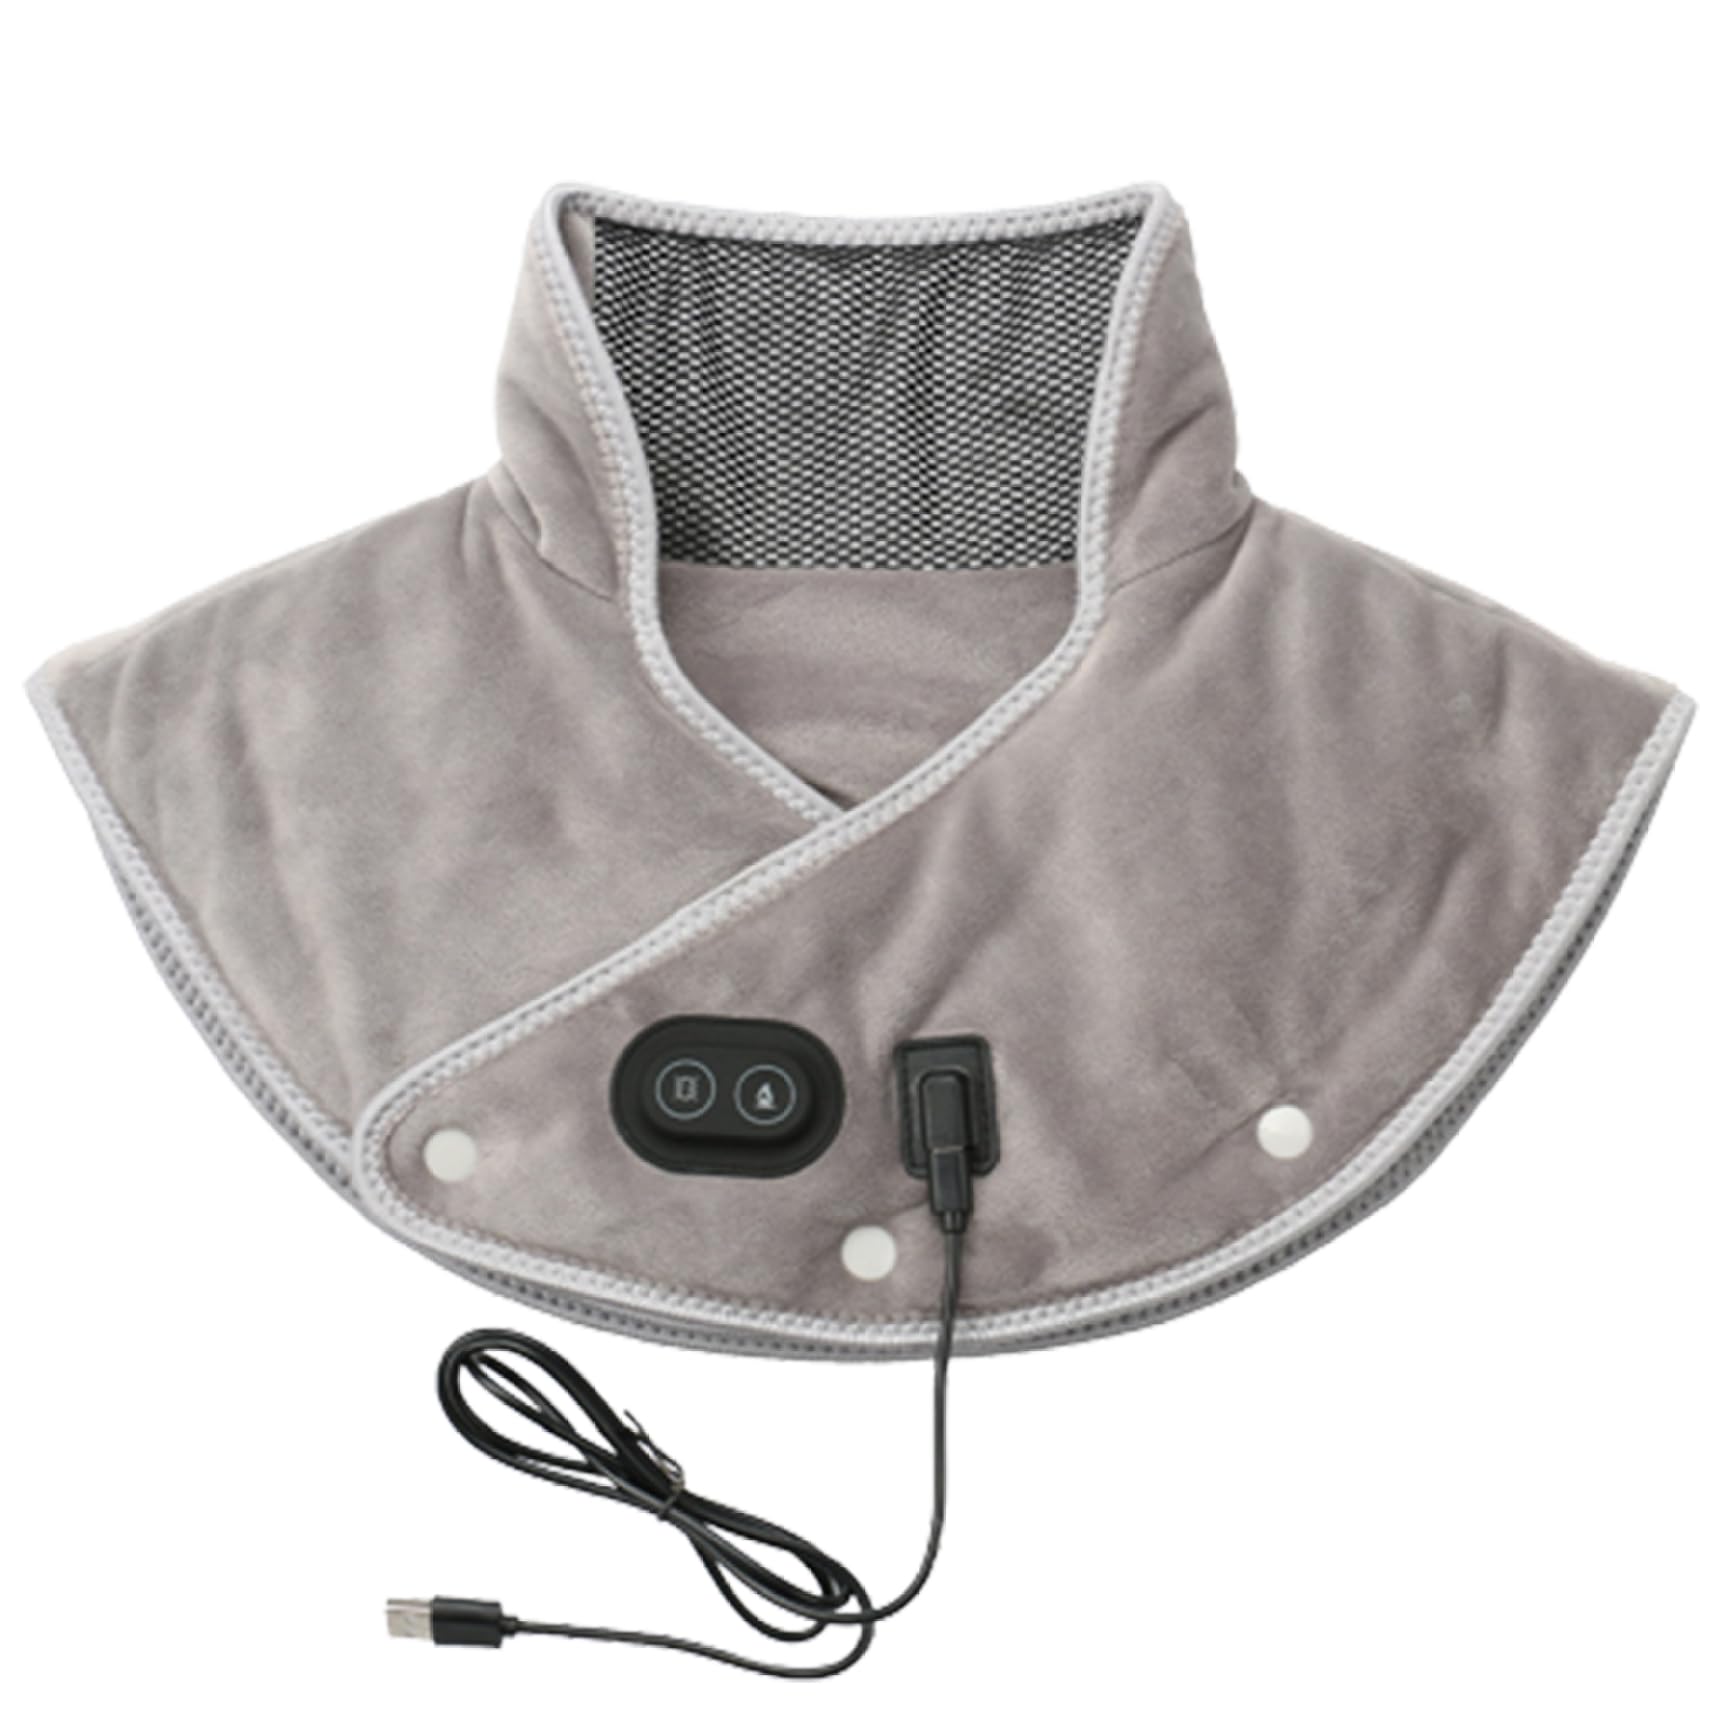 Neck and Shoulder Massager Neck Massager Neck Heating Pad with Vibration 12x18 Inch Electric Heating Pad with 3 Temp ＆ Massage Settings Auto Shut-Off Vibrating Heating Pad Gifts for Pain Relief